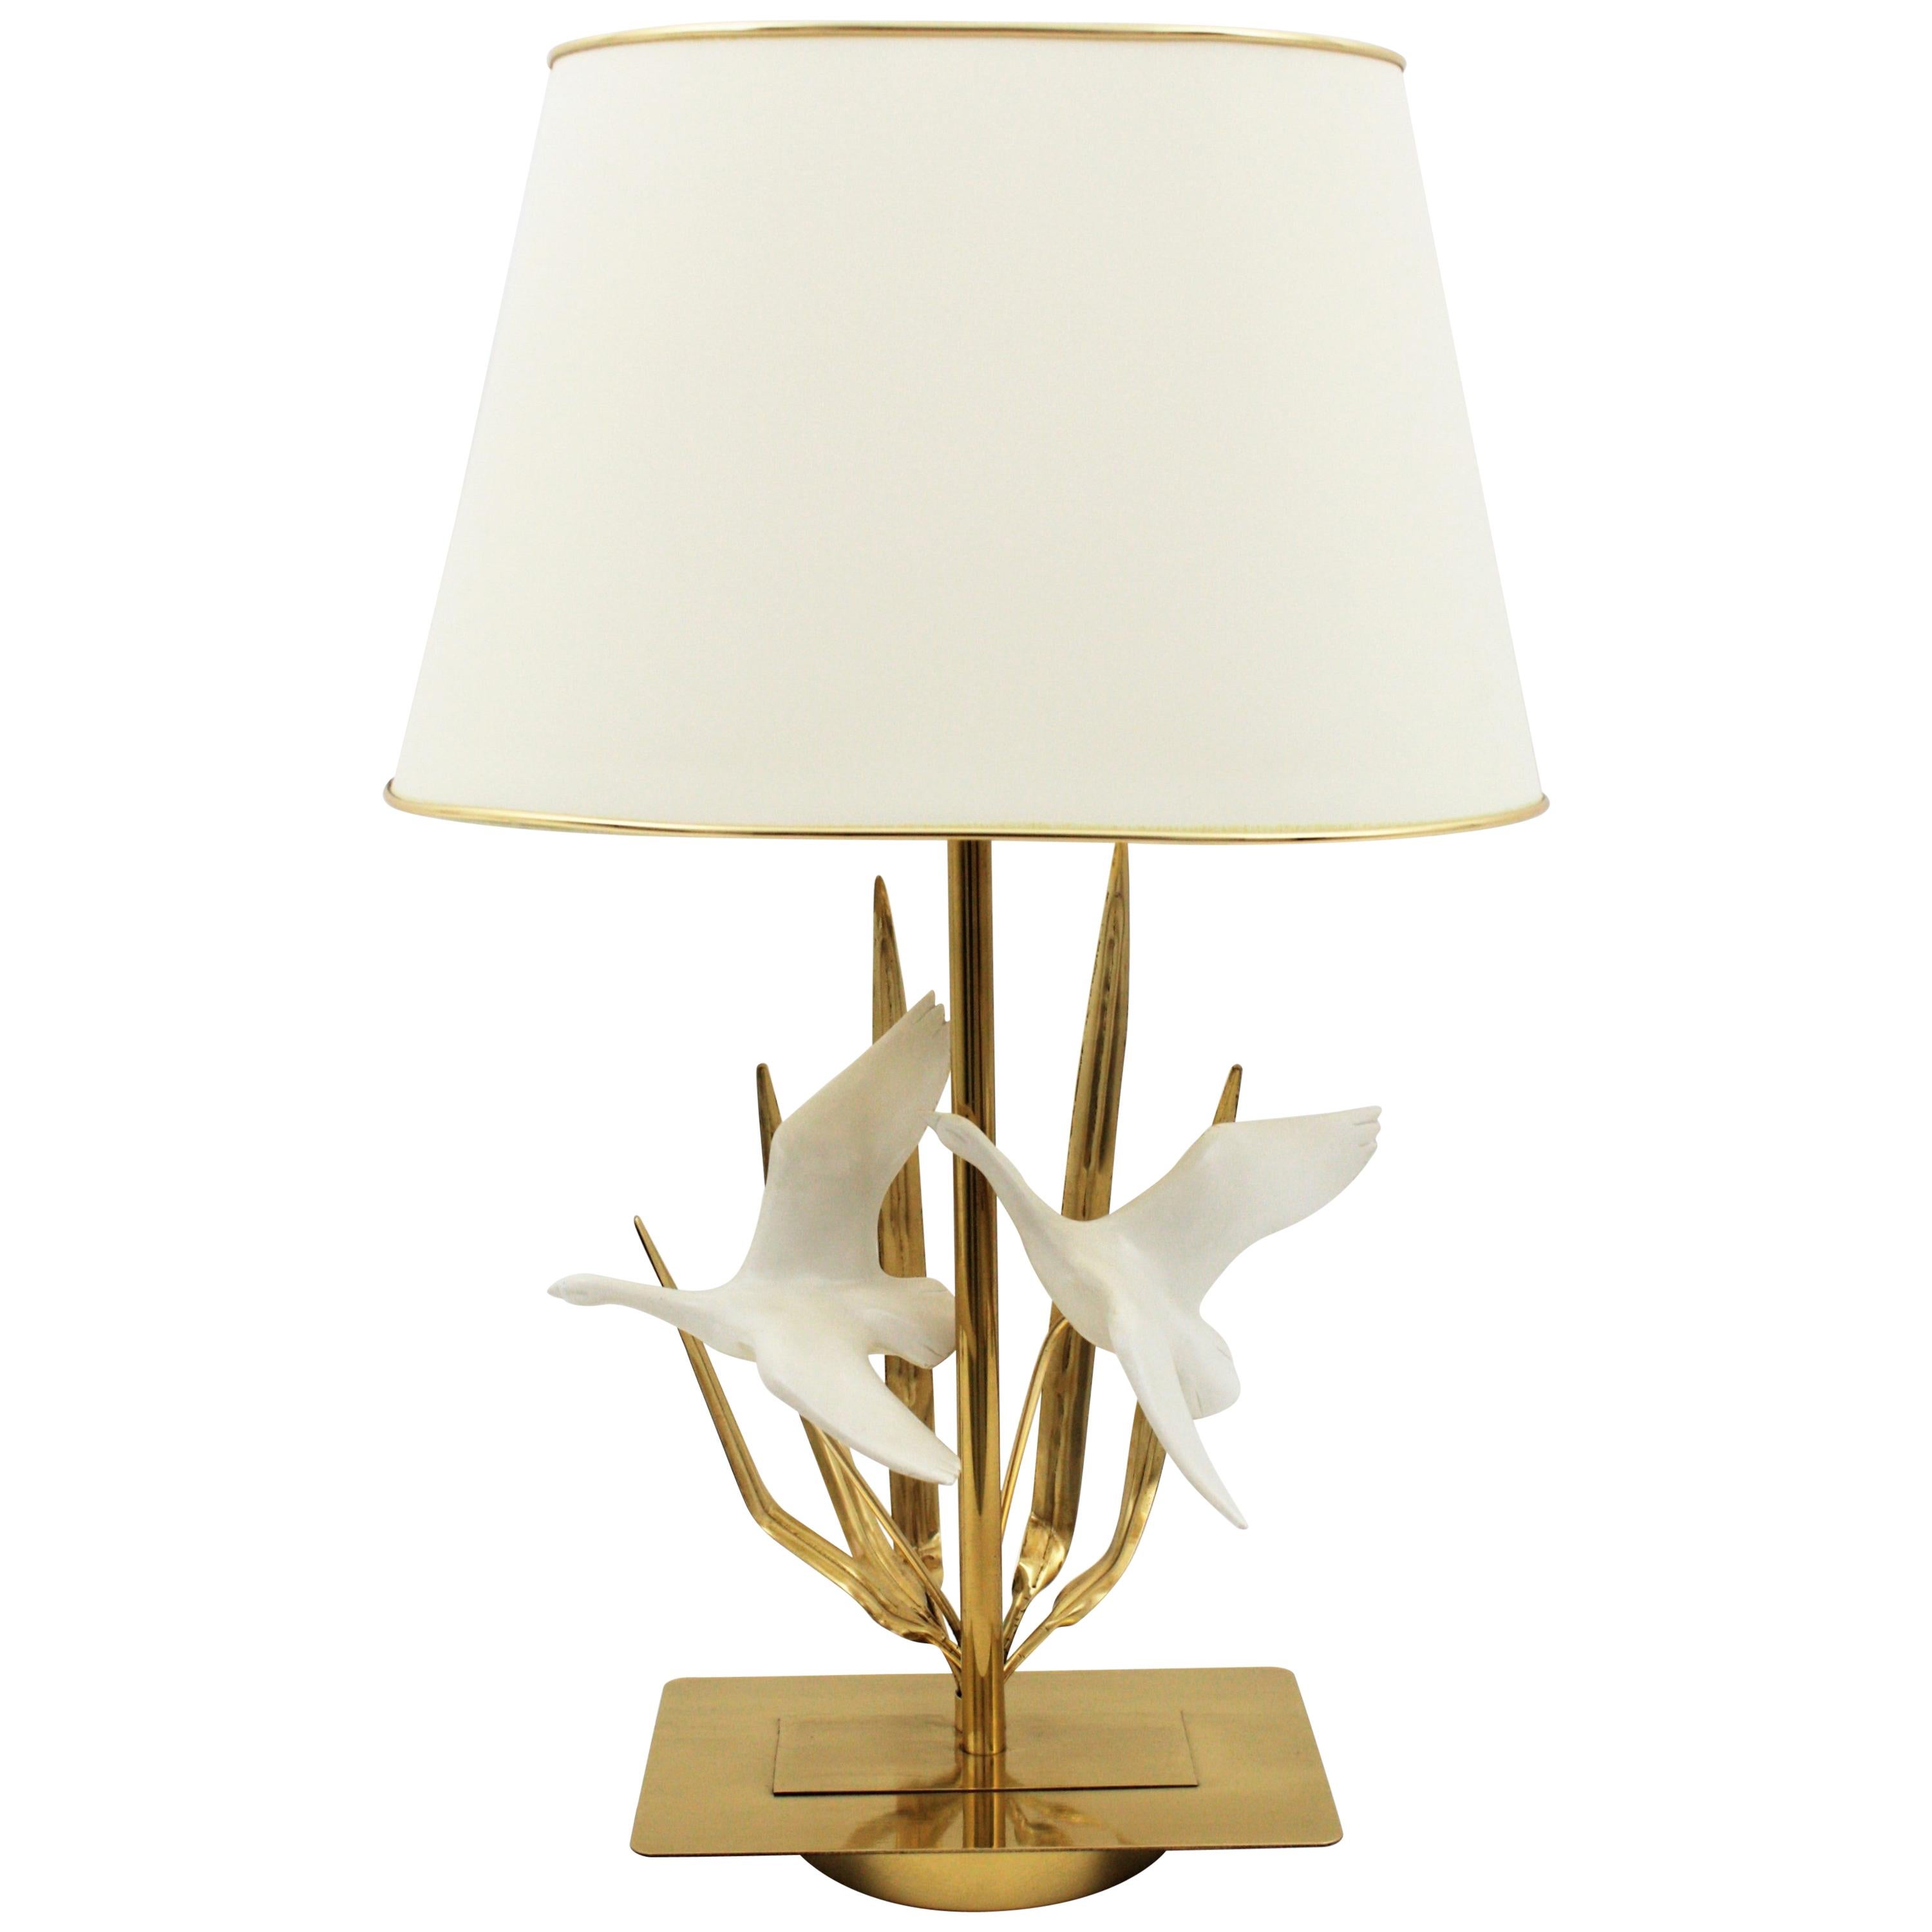 An sculptural Midcentury brass table lamp with leaf details and flying birds, France, 1970s.
The lamp is all made in brass and it has two resin birds as decoration.
The lampshade is included.
Measures: 58 cm H x 36 cm W x 24 cm D
Measures without